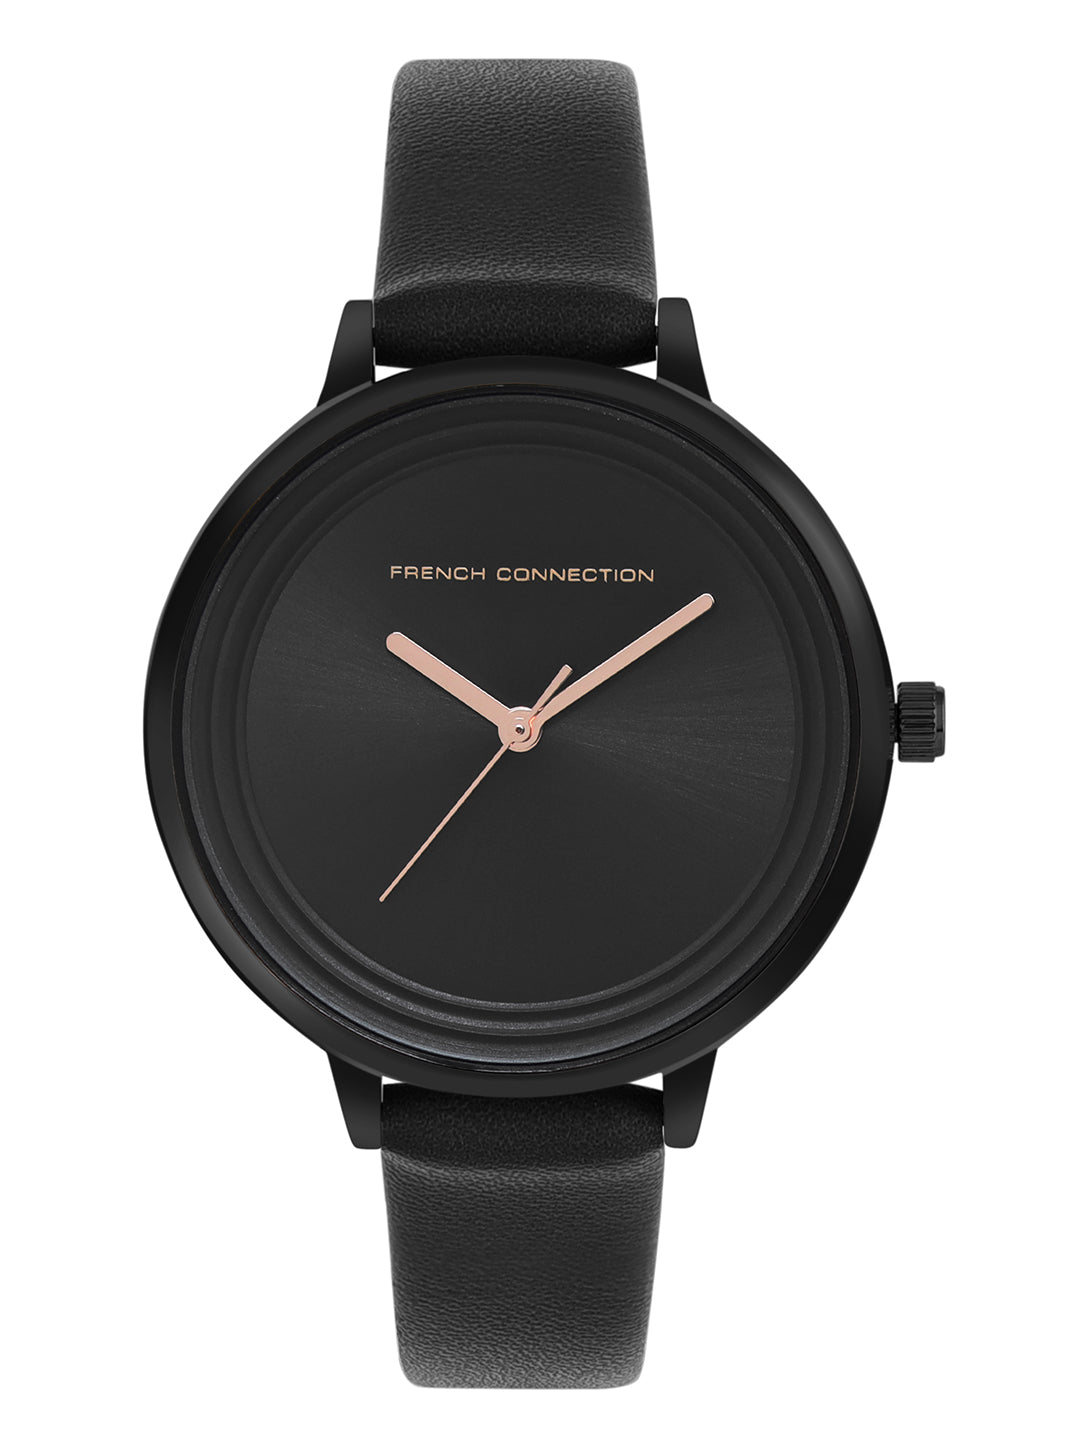 French Connection Analog Black Dial Women's Watch-FCN0001X